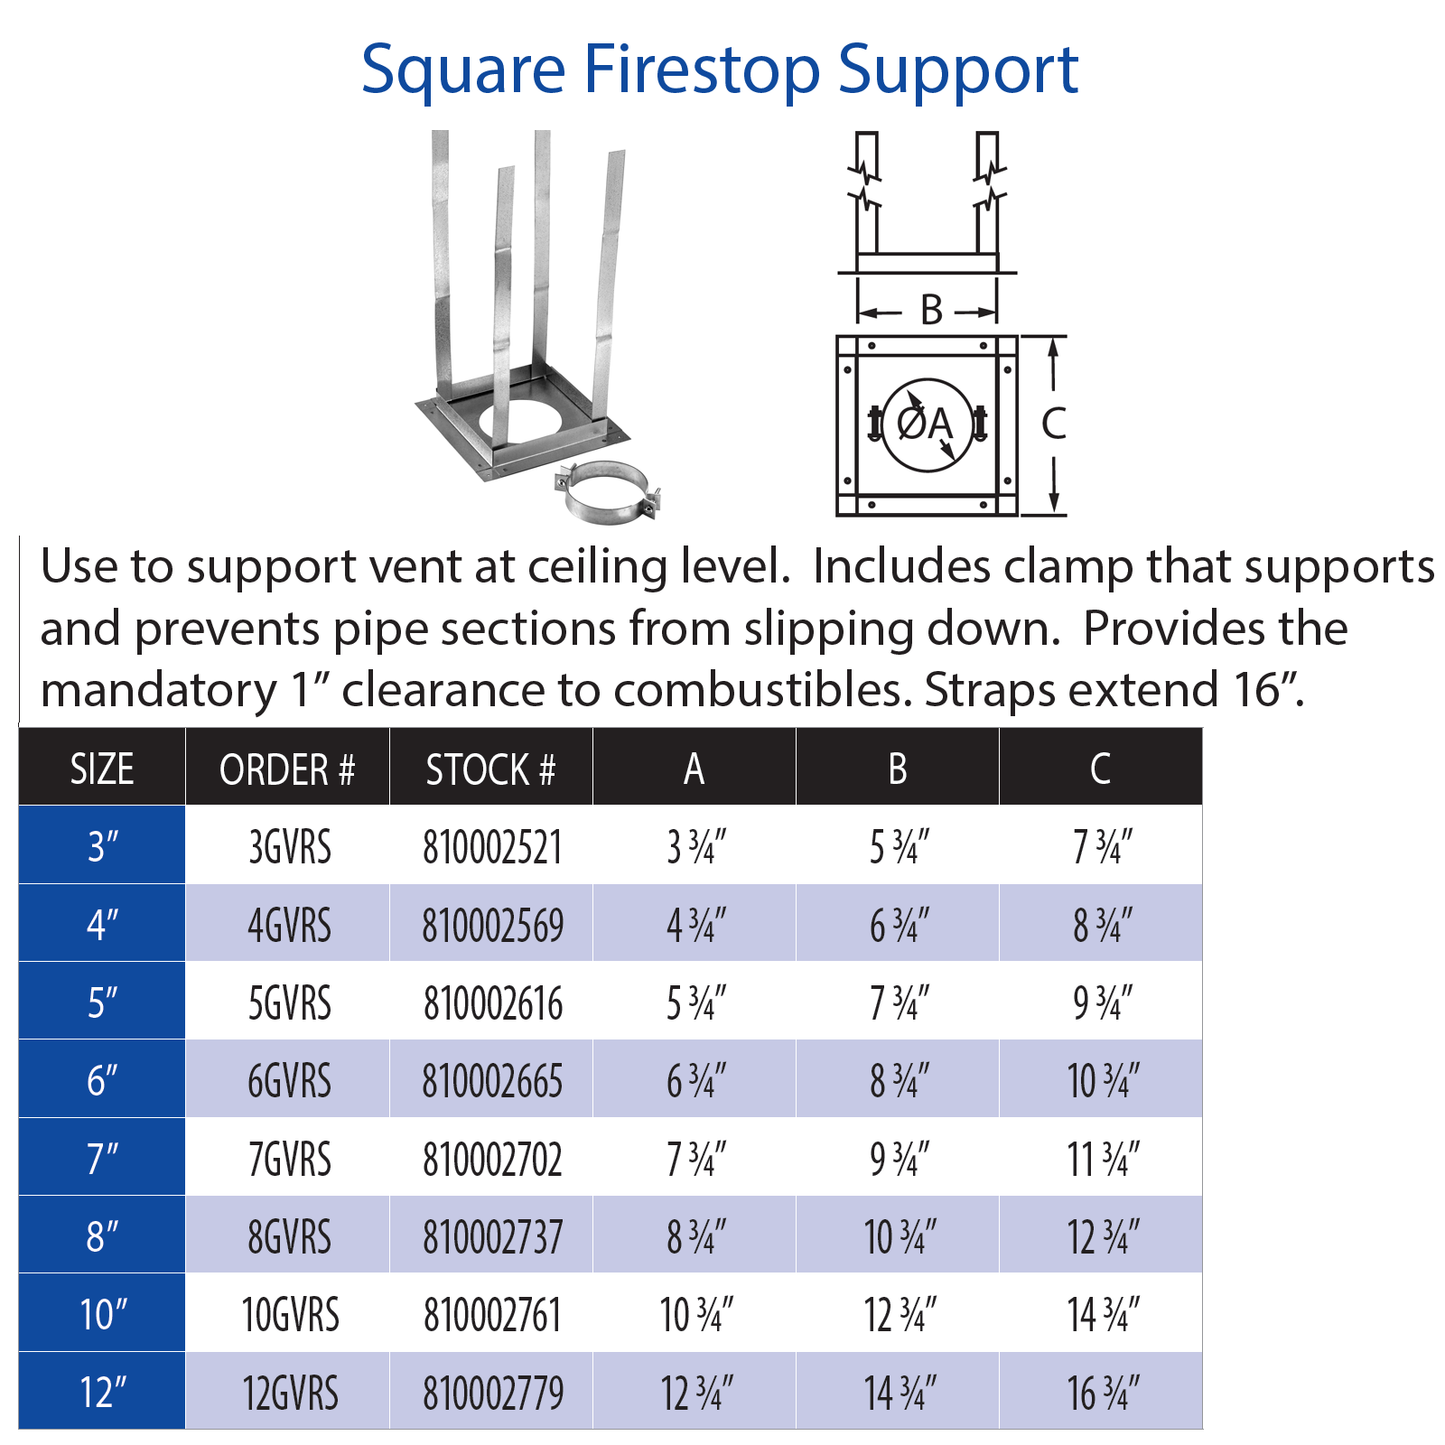 DuraVent Type B Square Firestop Support | 4GVRS